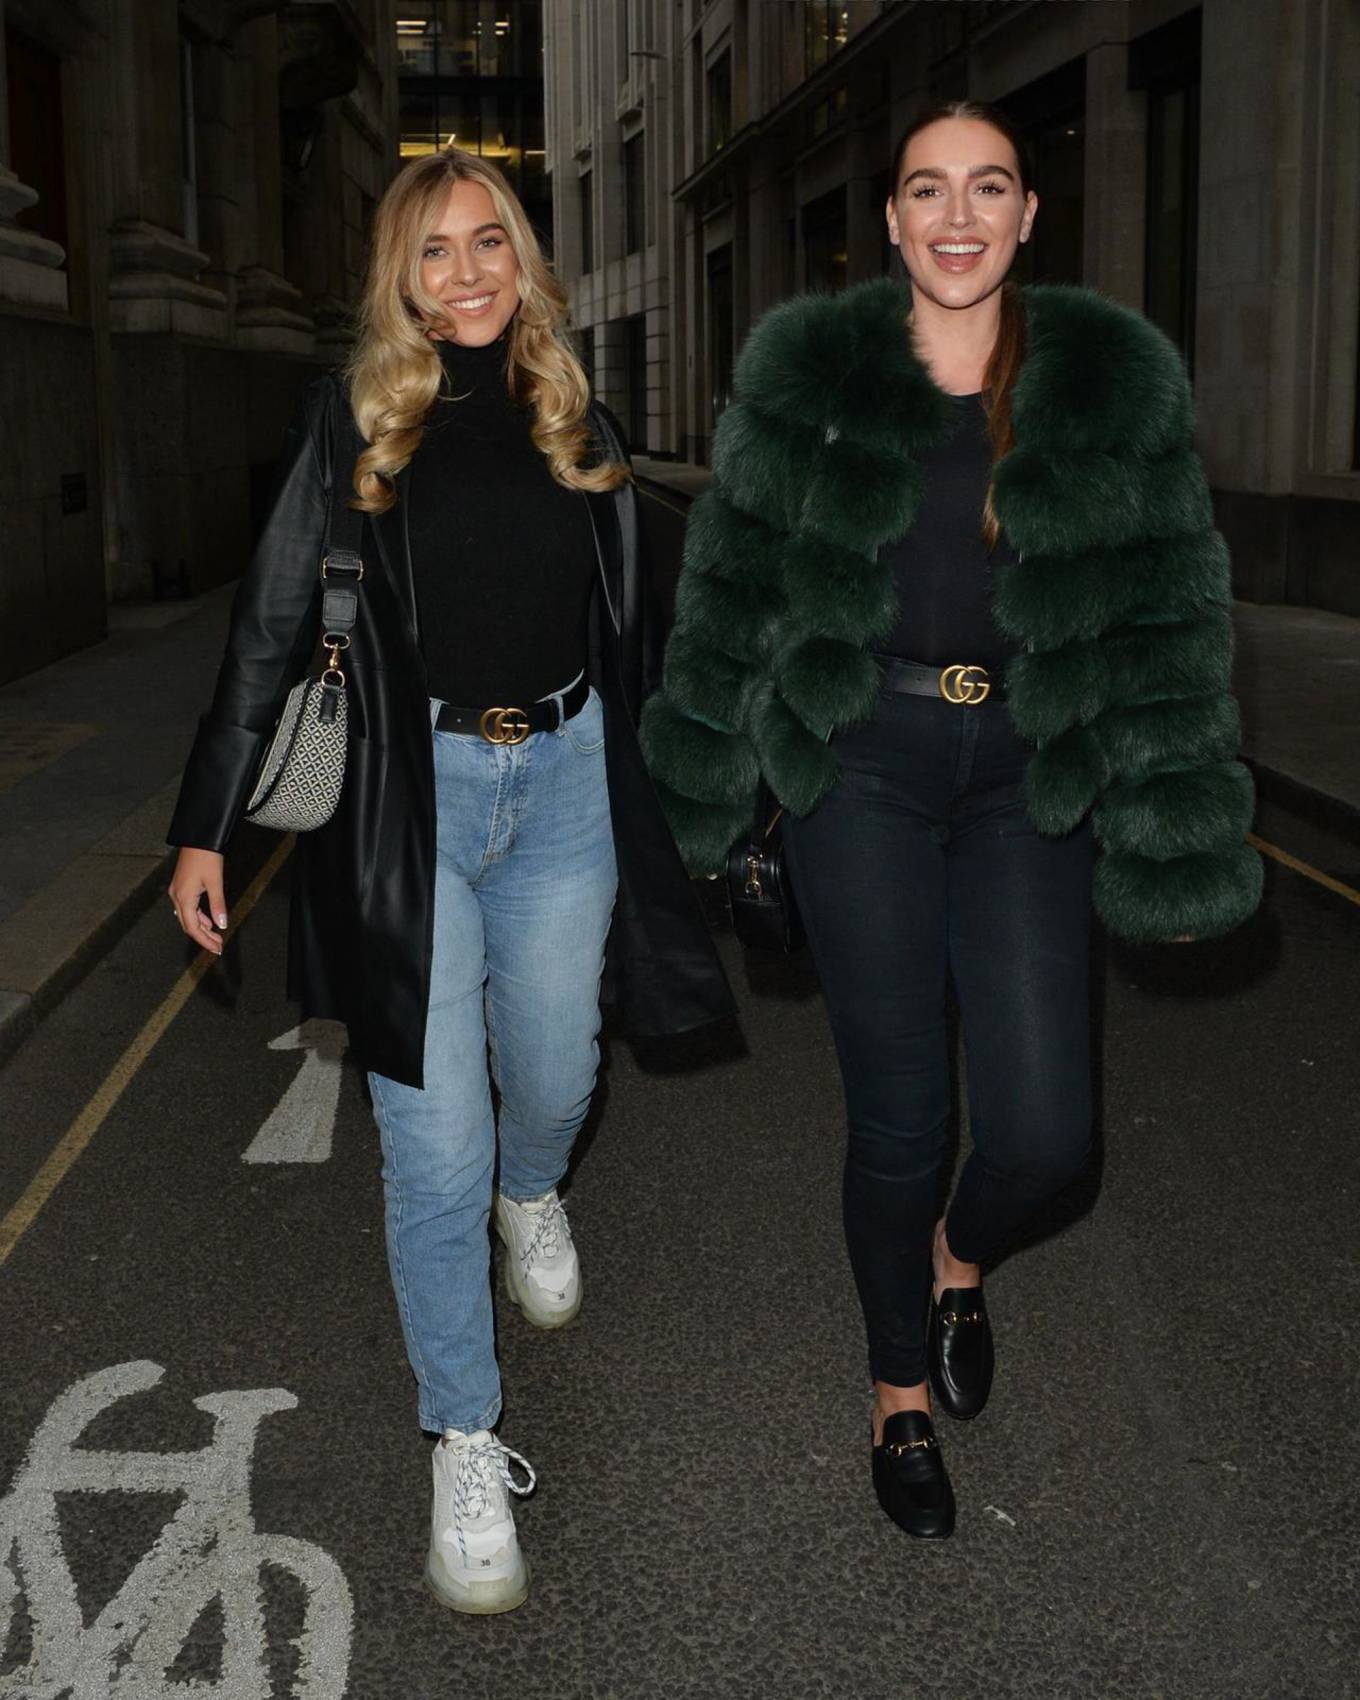 Chloe Ross 2021 : Chloe Ross – With sister Maddy Ross night out at Madisons roof bar in London-03